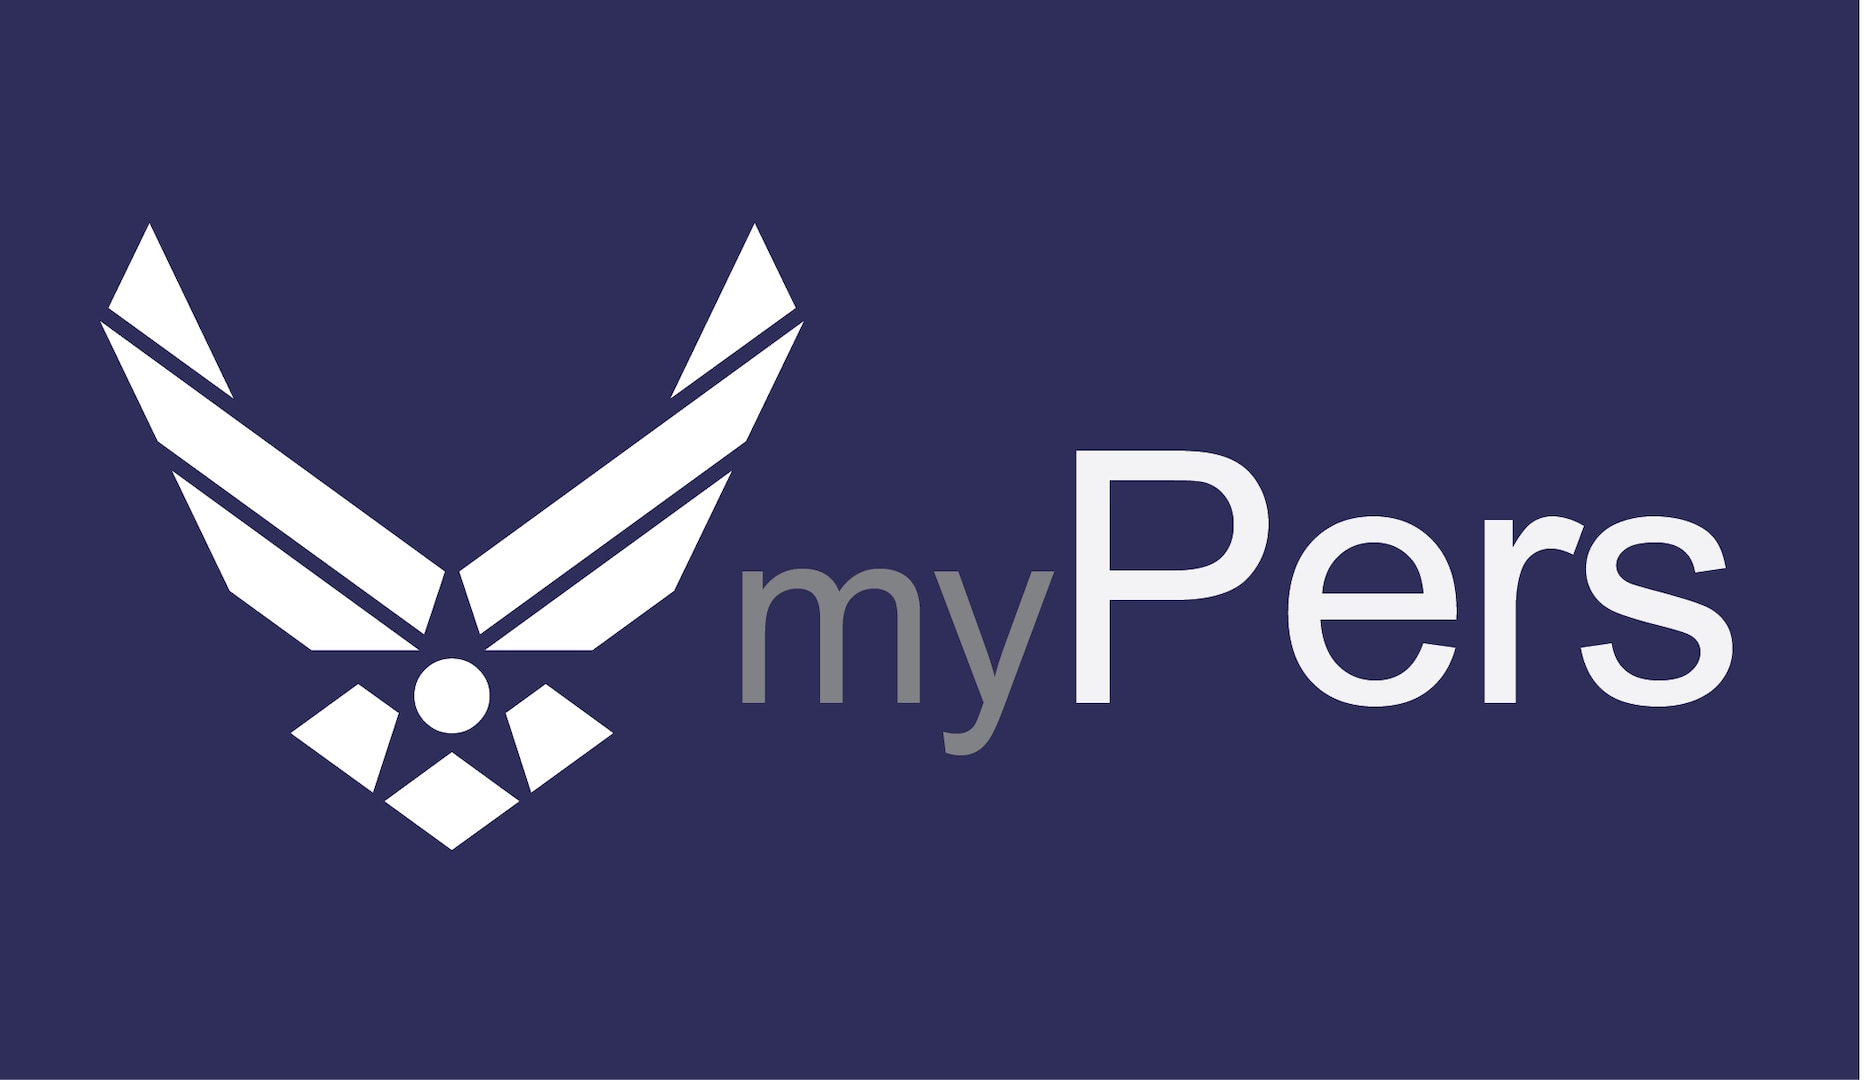 Submitting civilian retirement applications just became a little easier. Effective April 1, 2021, civilian Airmen and Guardians can now submit their electronically-signed retirement forms using myPers.